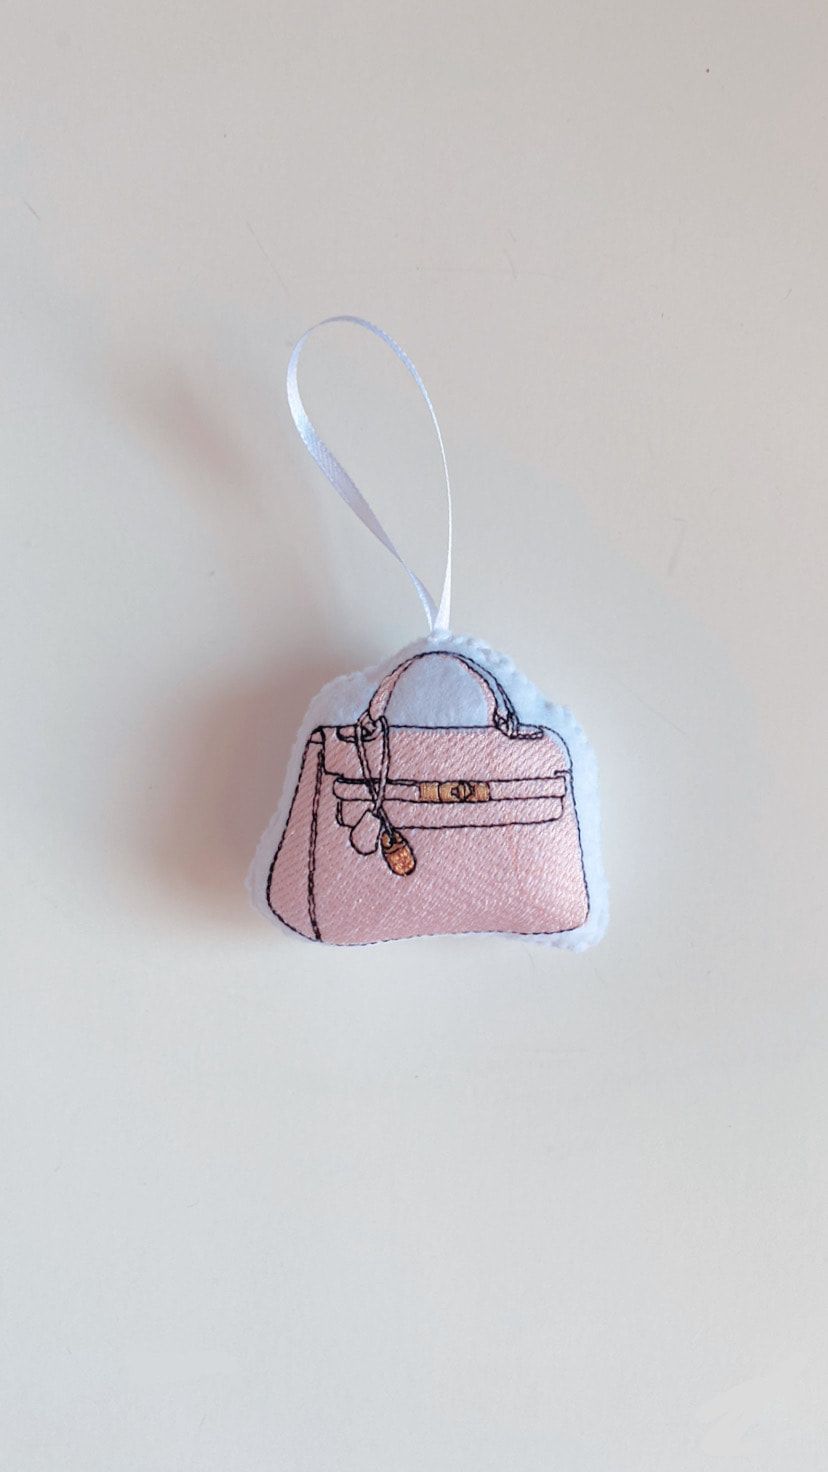 Hermes Mini Kelly Bag Ornament | All The Finery